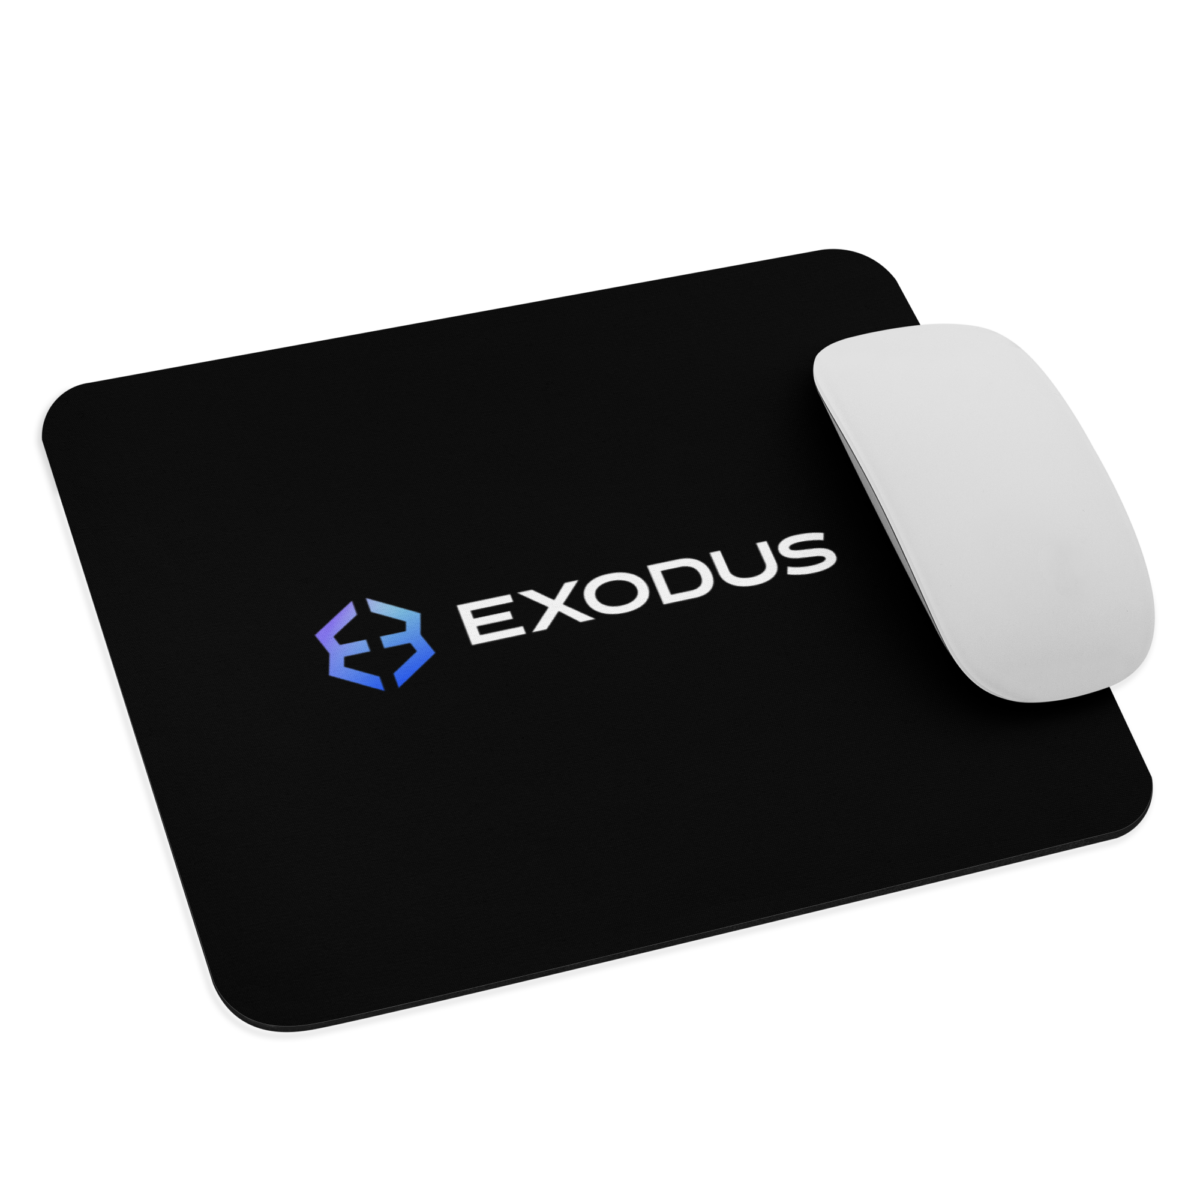 mouse pad white front 63172e08be784 - Exodus Mouse Pad